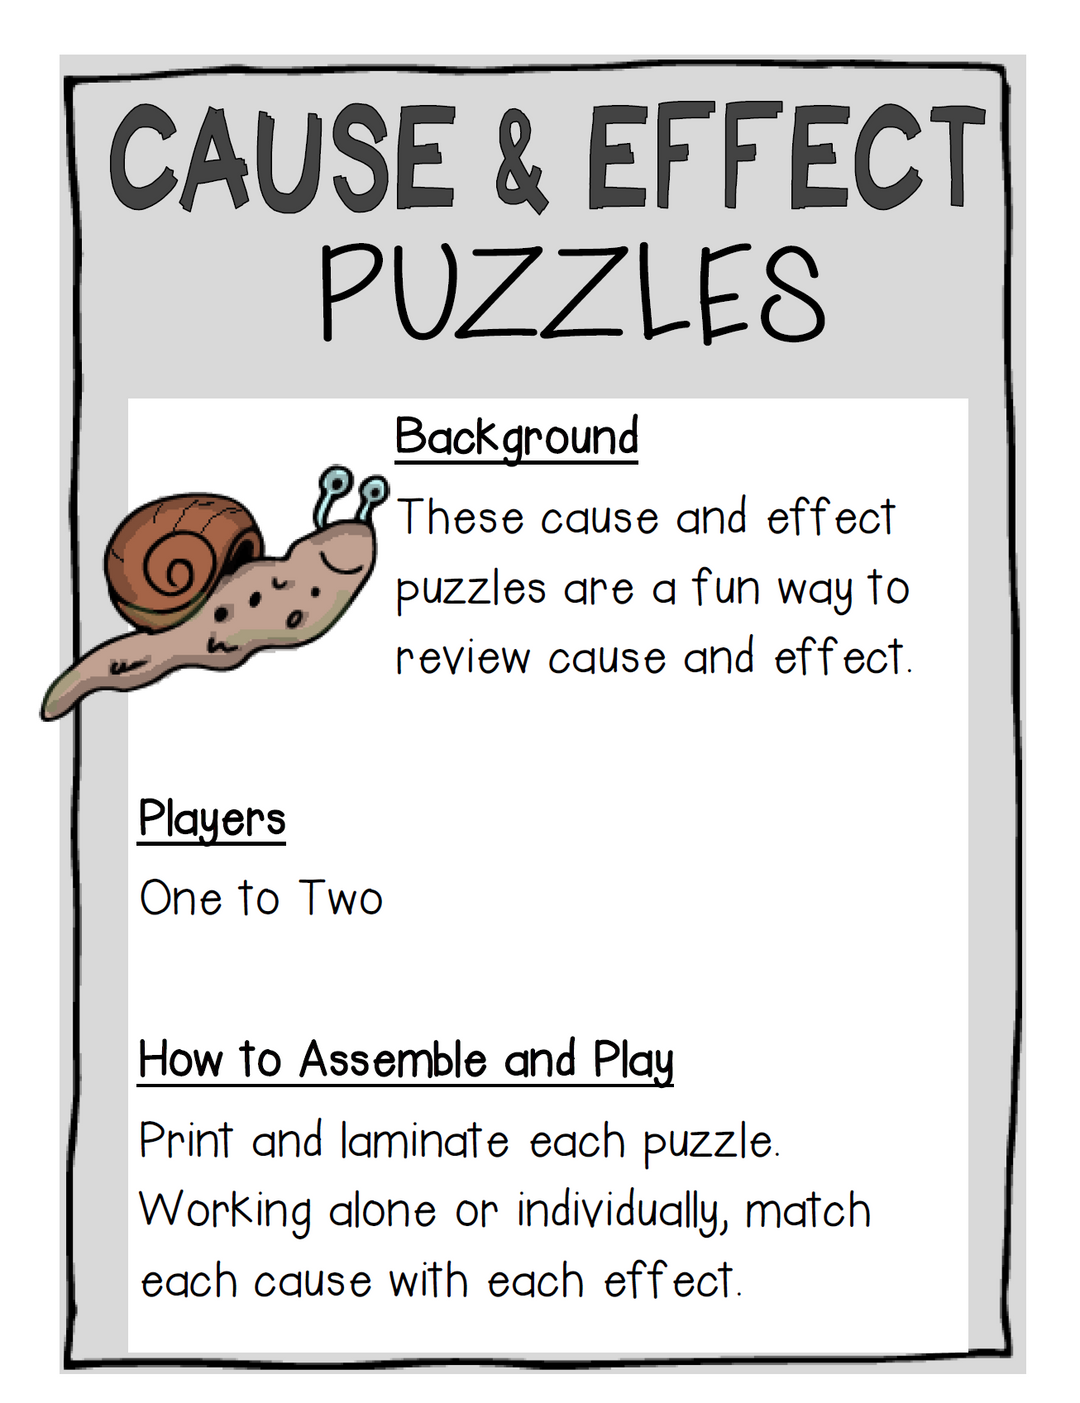 Cause & Effect Puzzles